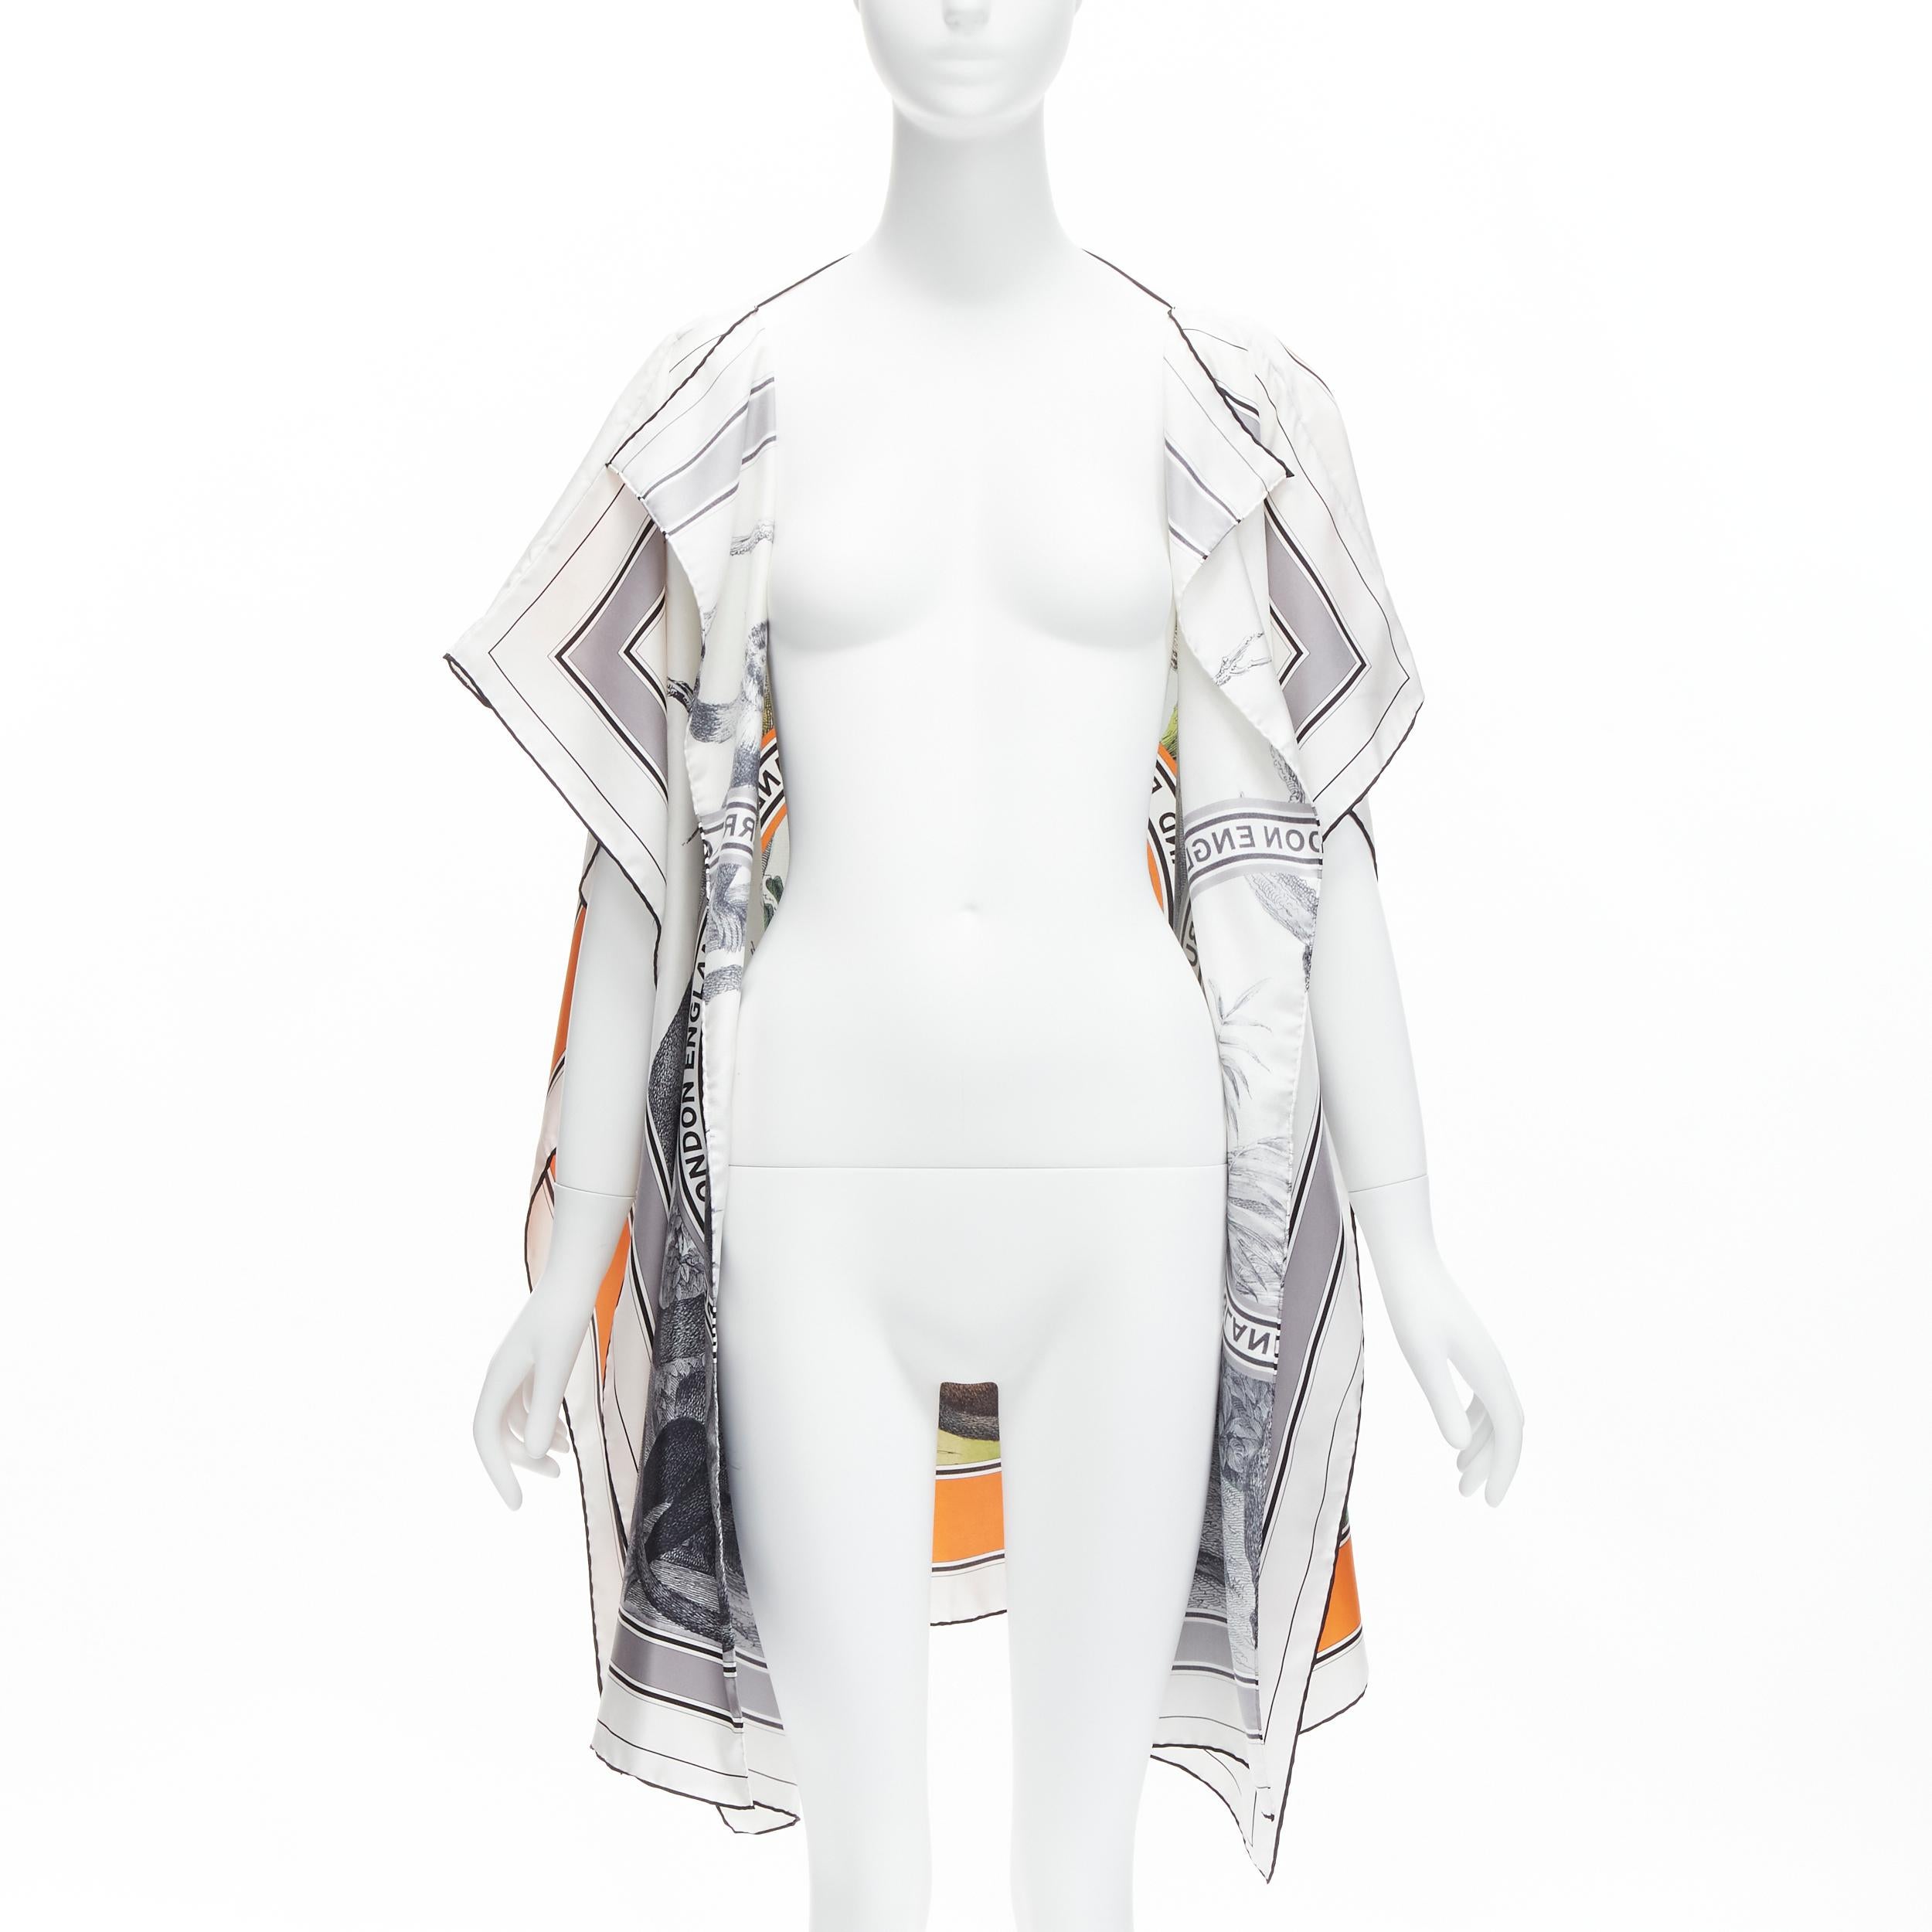 BURBERRY LONDON Tisci 100% silk orange monkey print draped scarf vest top
Reference: LNKO/A02122
Brand: Burberry
Designer: Riccardo Tisci
Material: Silk
Color: Pearl, Orange
Pattern: Photographic Print
Made in: Italy

CONDITION:
Condition: